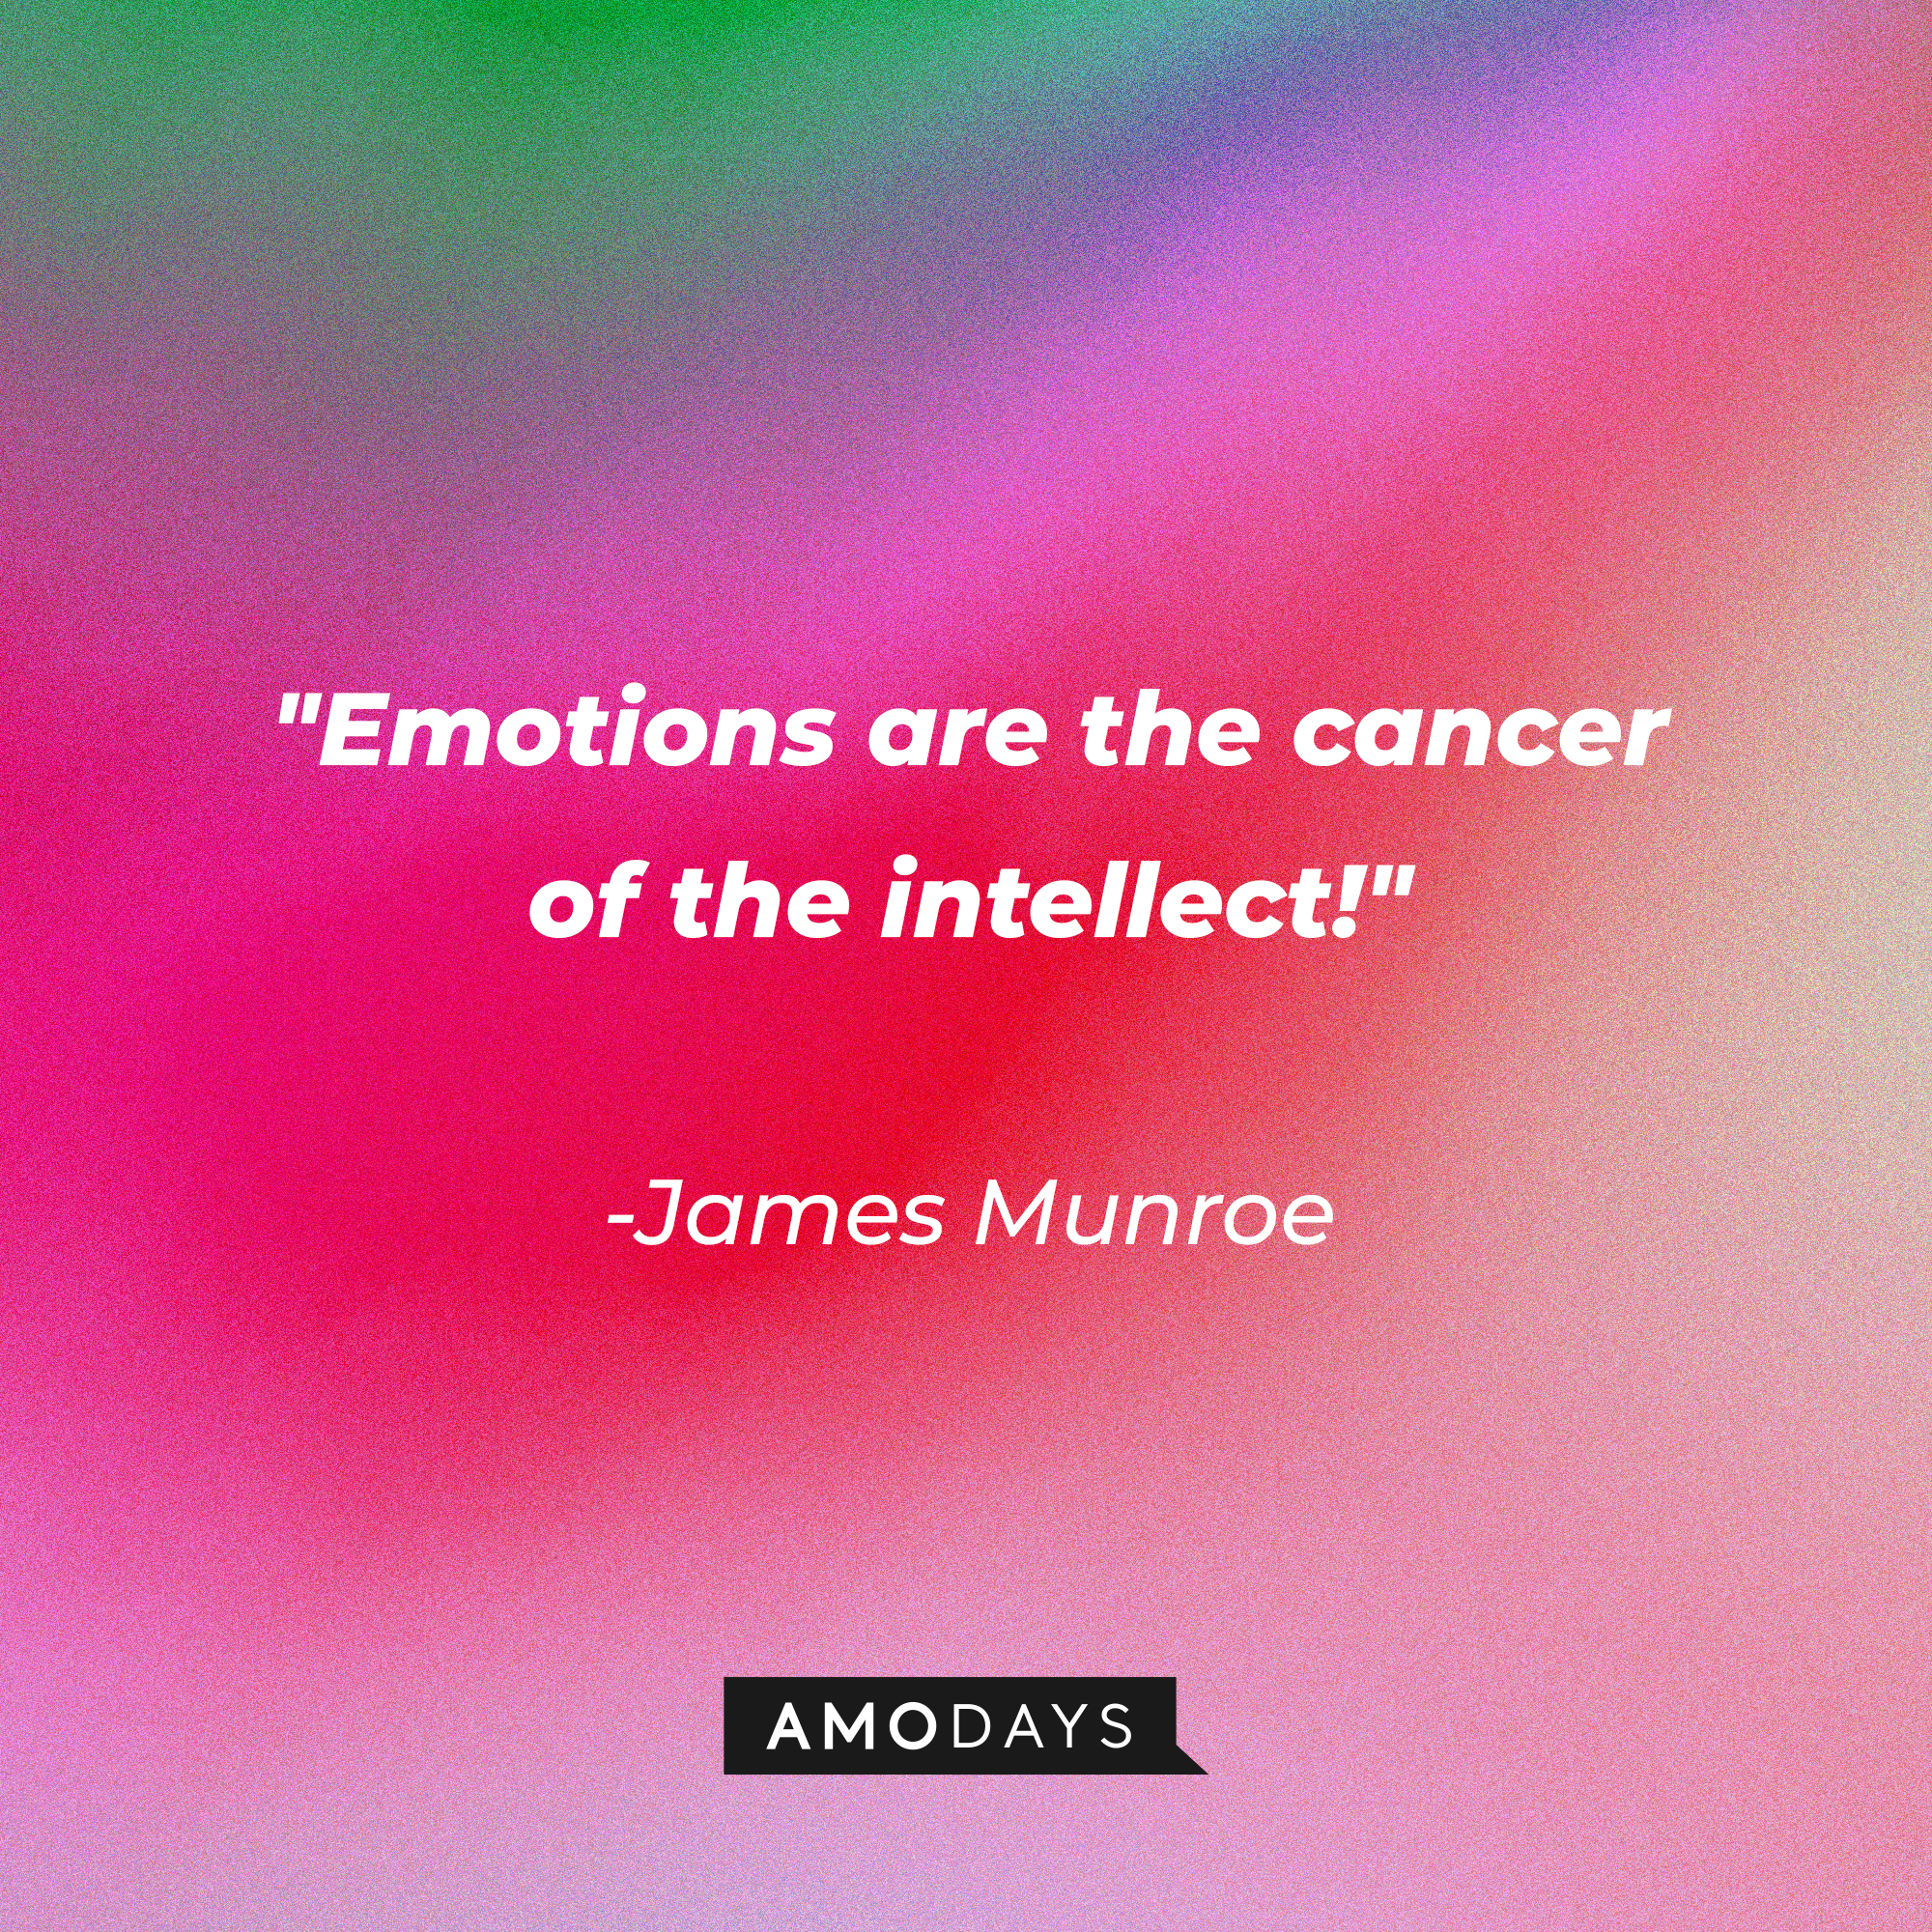 James Munroe’s quote: “Emotions are the cancer of the intellect!" | Source: AmoDays